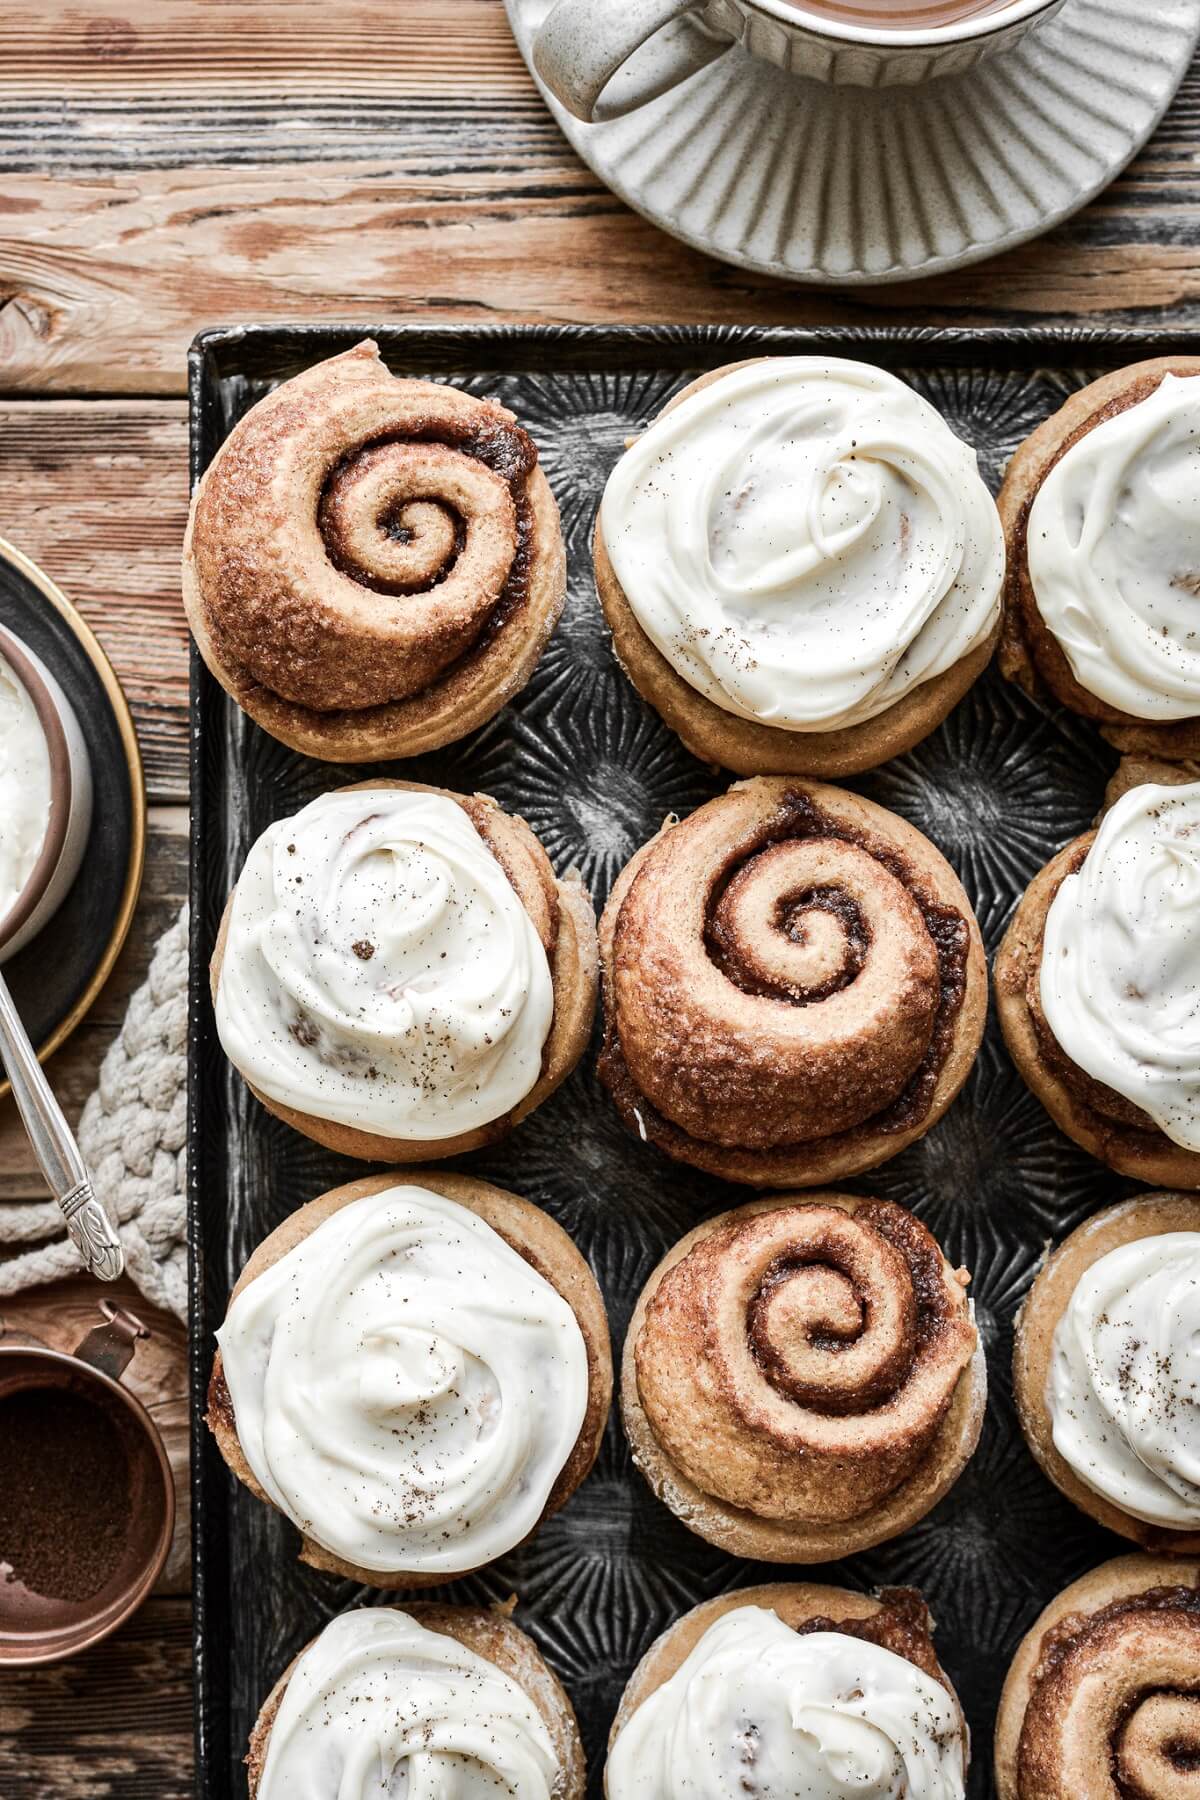 Gingerbread cinnamon rolls with cream cheese frosting.